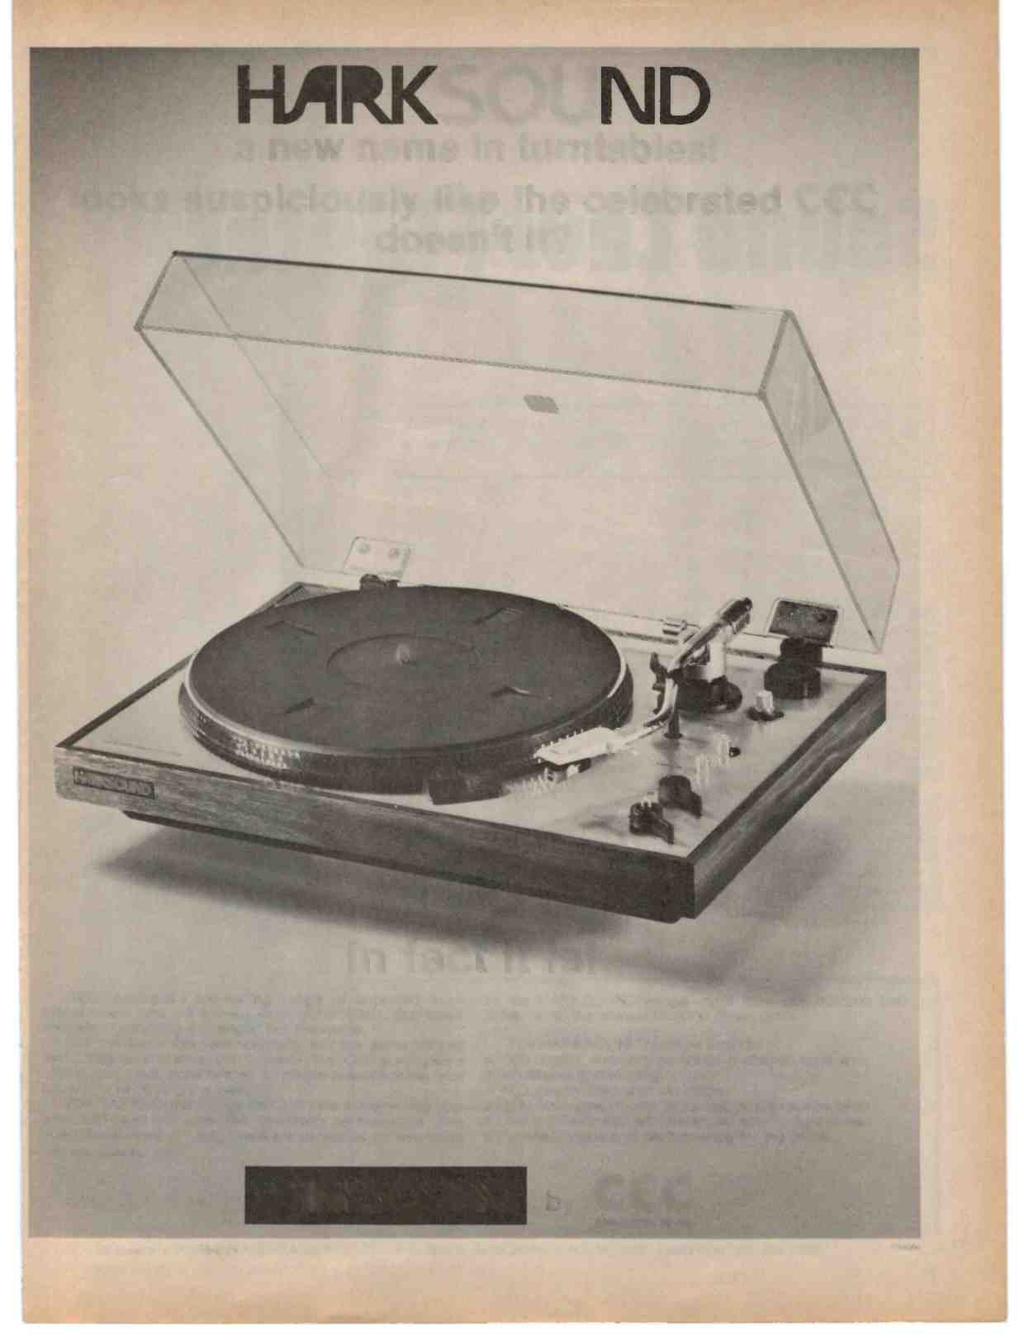 HARKSOUND a new name in turntables! looks suspiciously like the celebrated CCC doesn't it? p...:...,.;-. ''''.- ;u::..:.:...:.::.::.-':;,.... -:4 a)-,.''.'''..:.1...-"...' '' 1«. '.5- _ir!